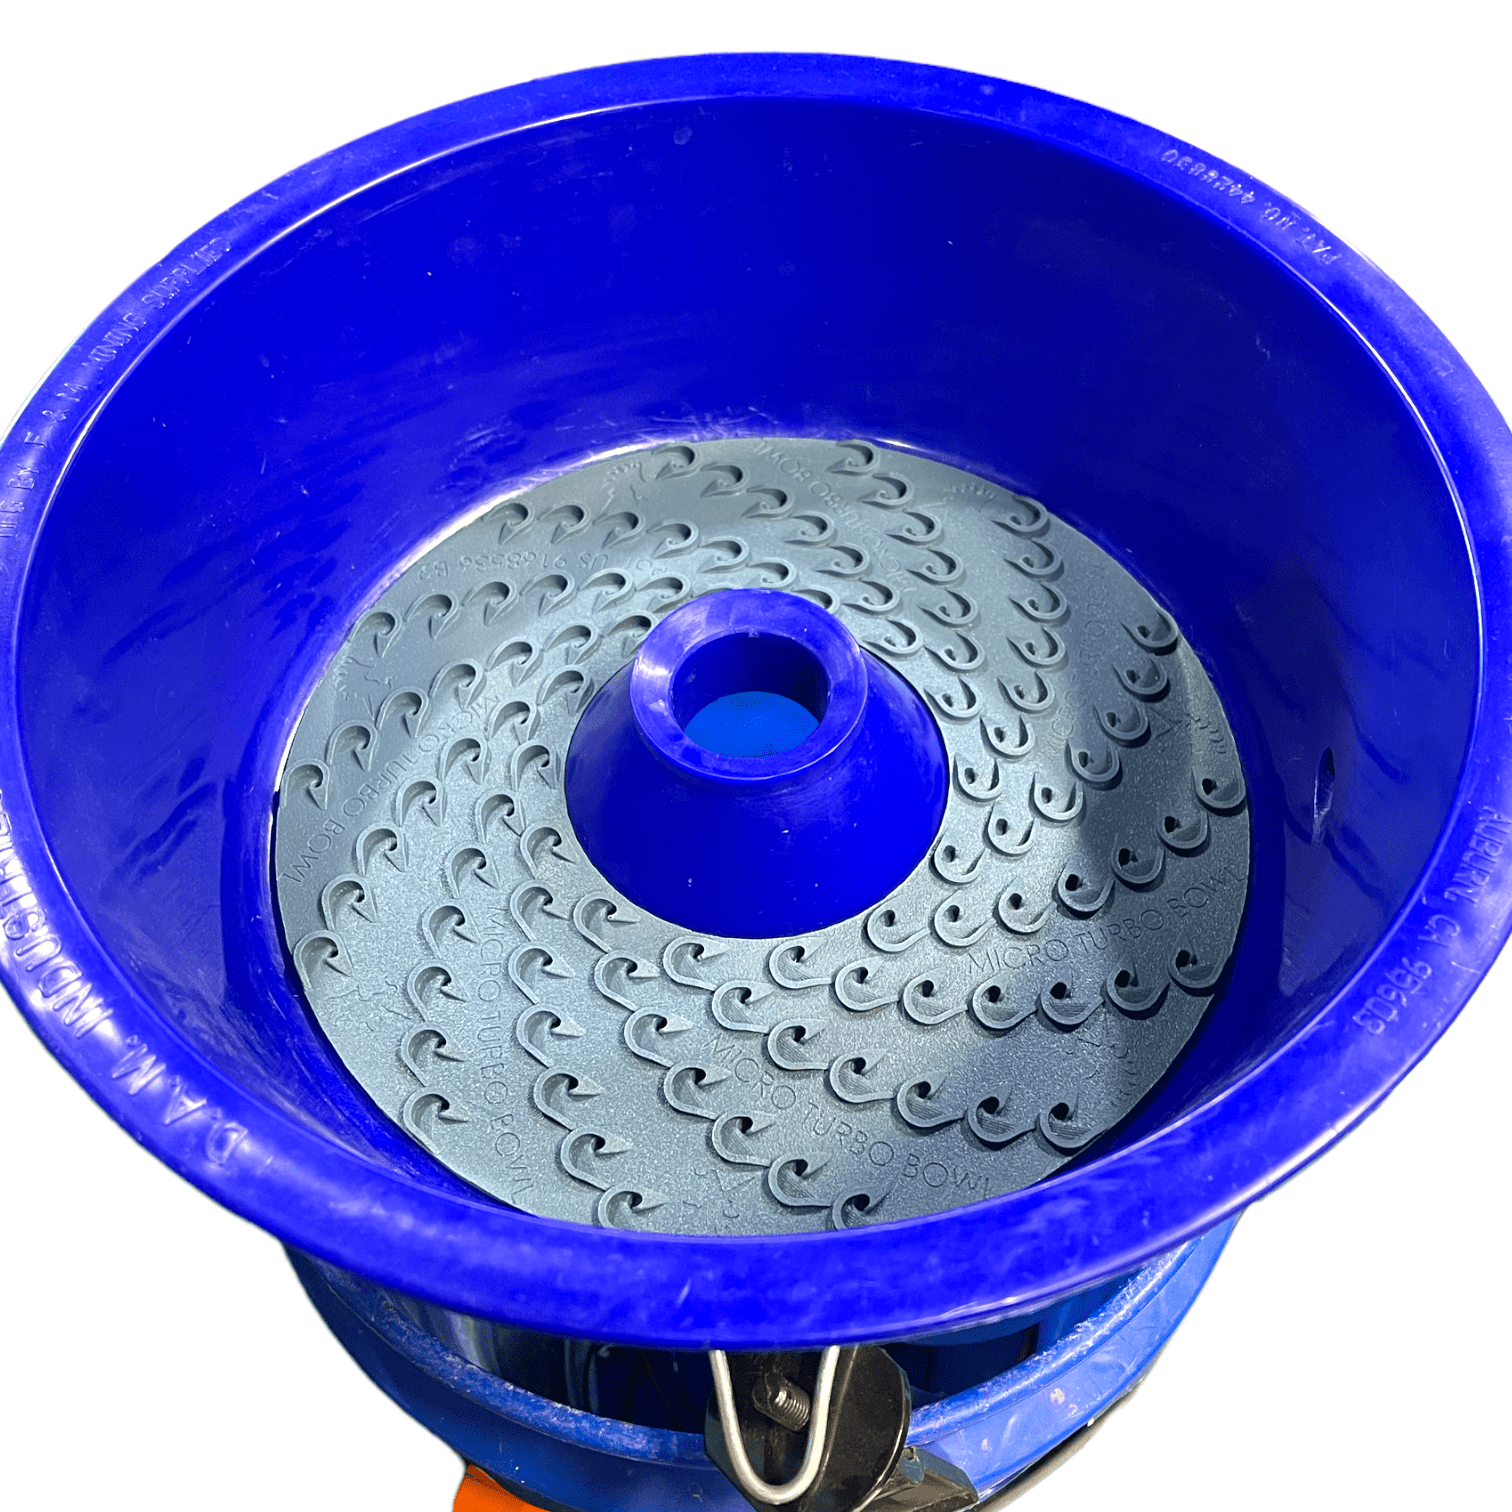 Blue bowl plumbed with pump, vortex matting, and leg levelers